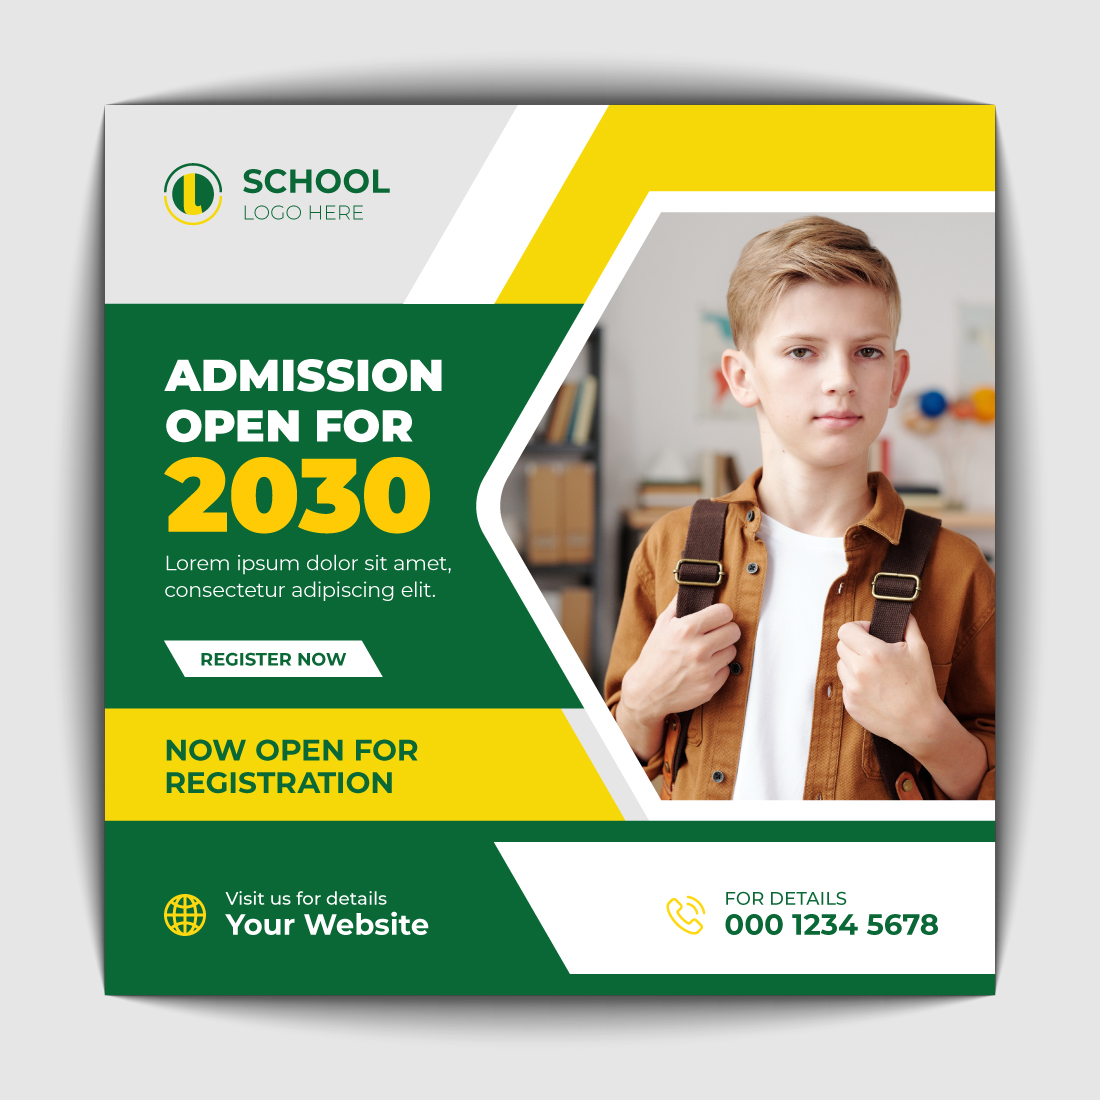 Green and yellow flyer for a school.